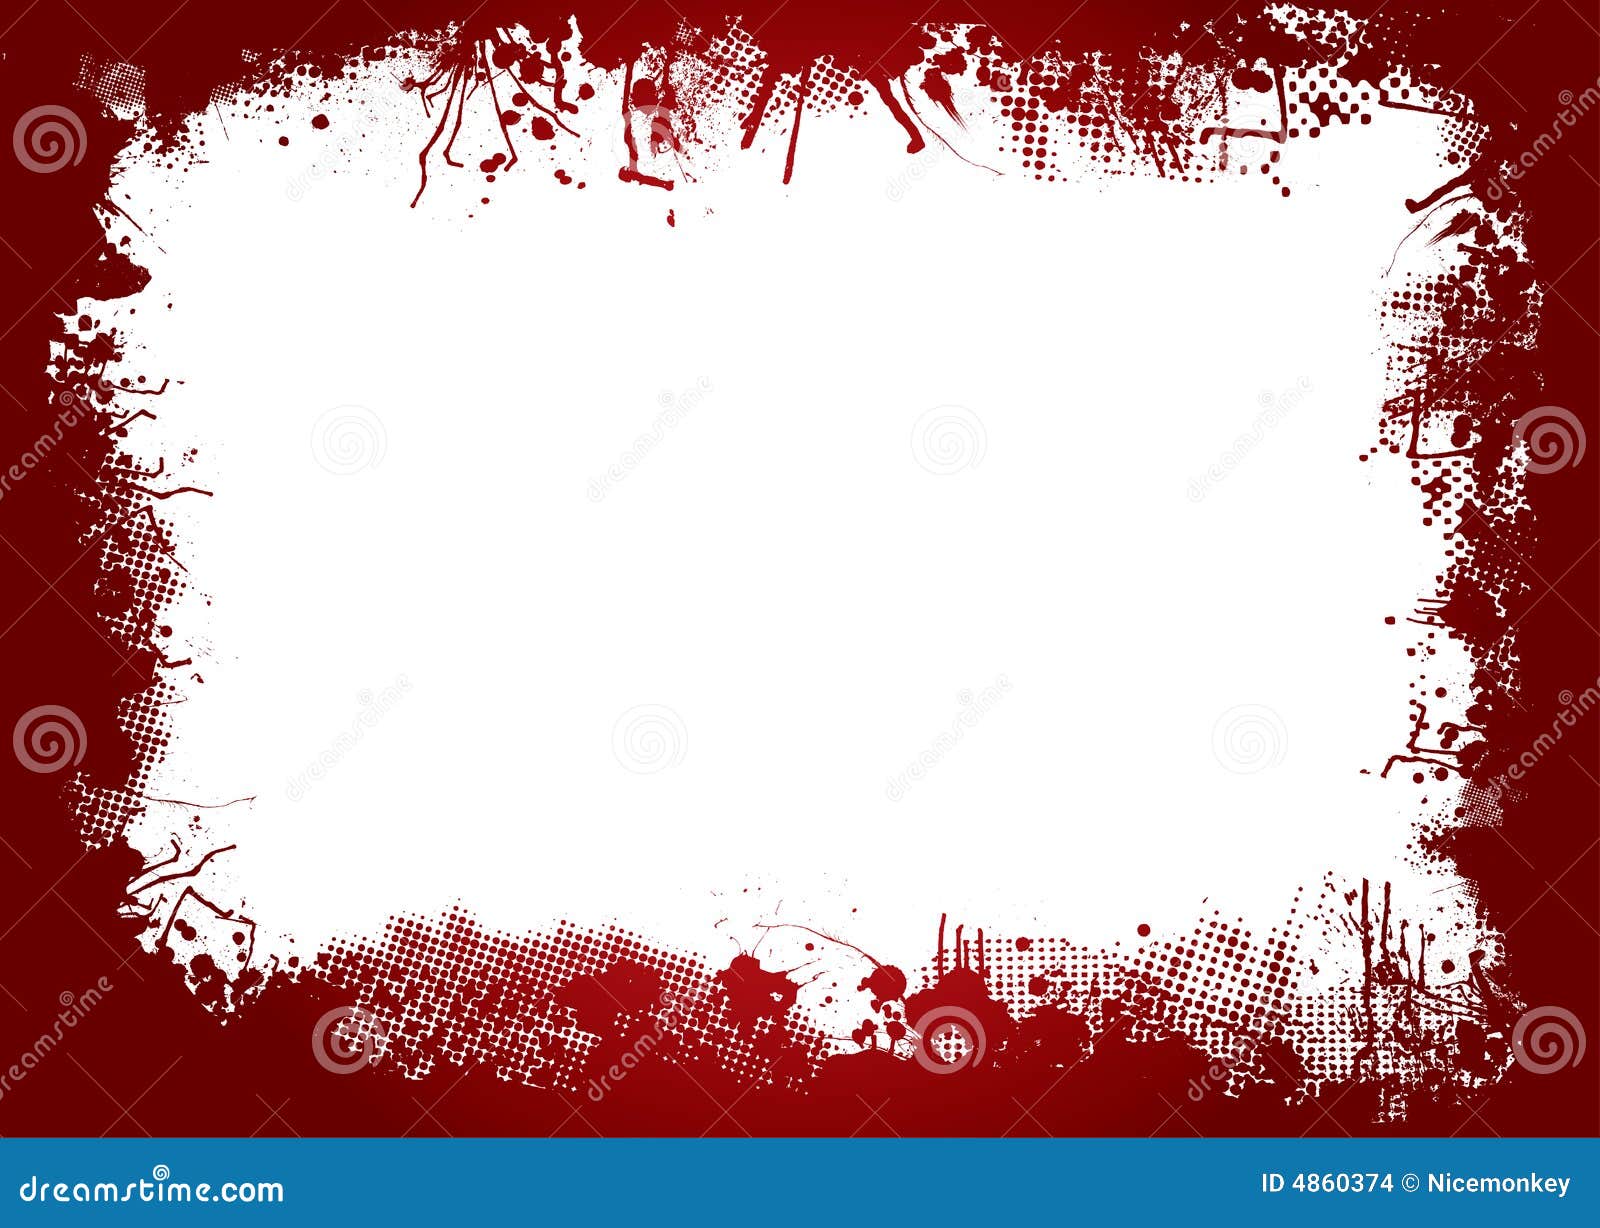 dripping blood clipart border - photo #23